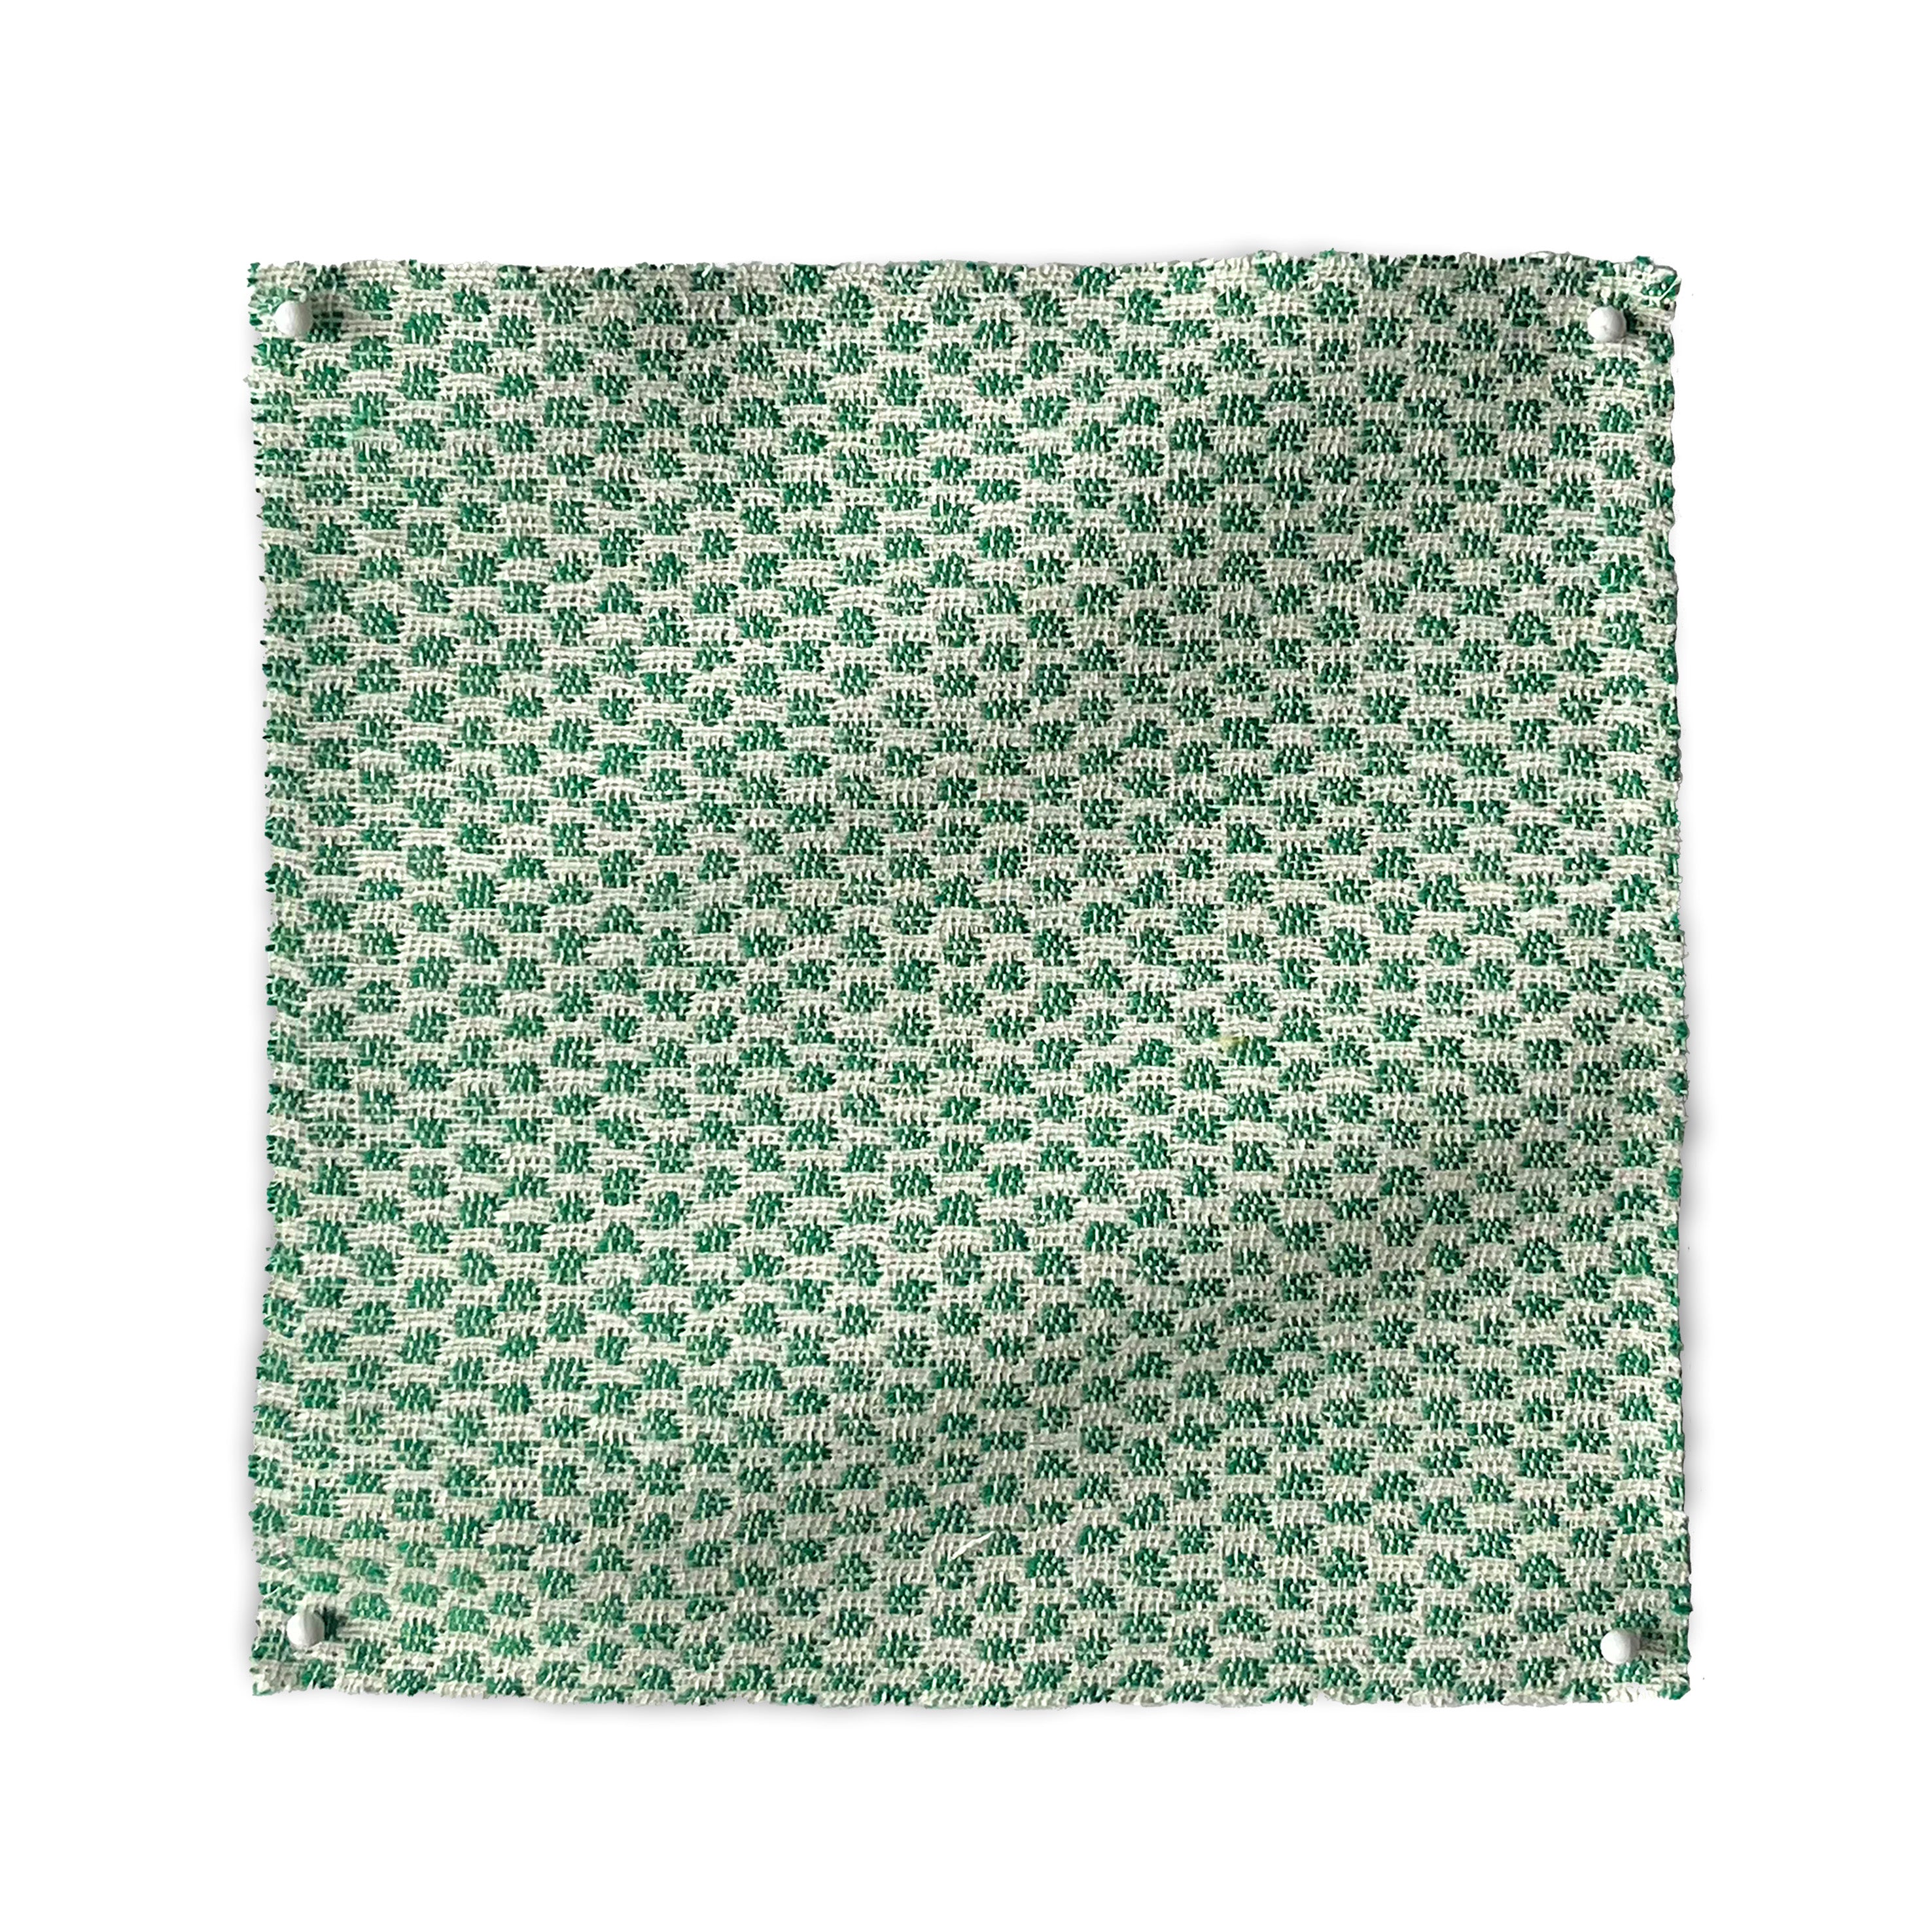 Square fabric swatch in a dense checked weave in green and white.